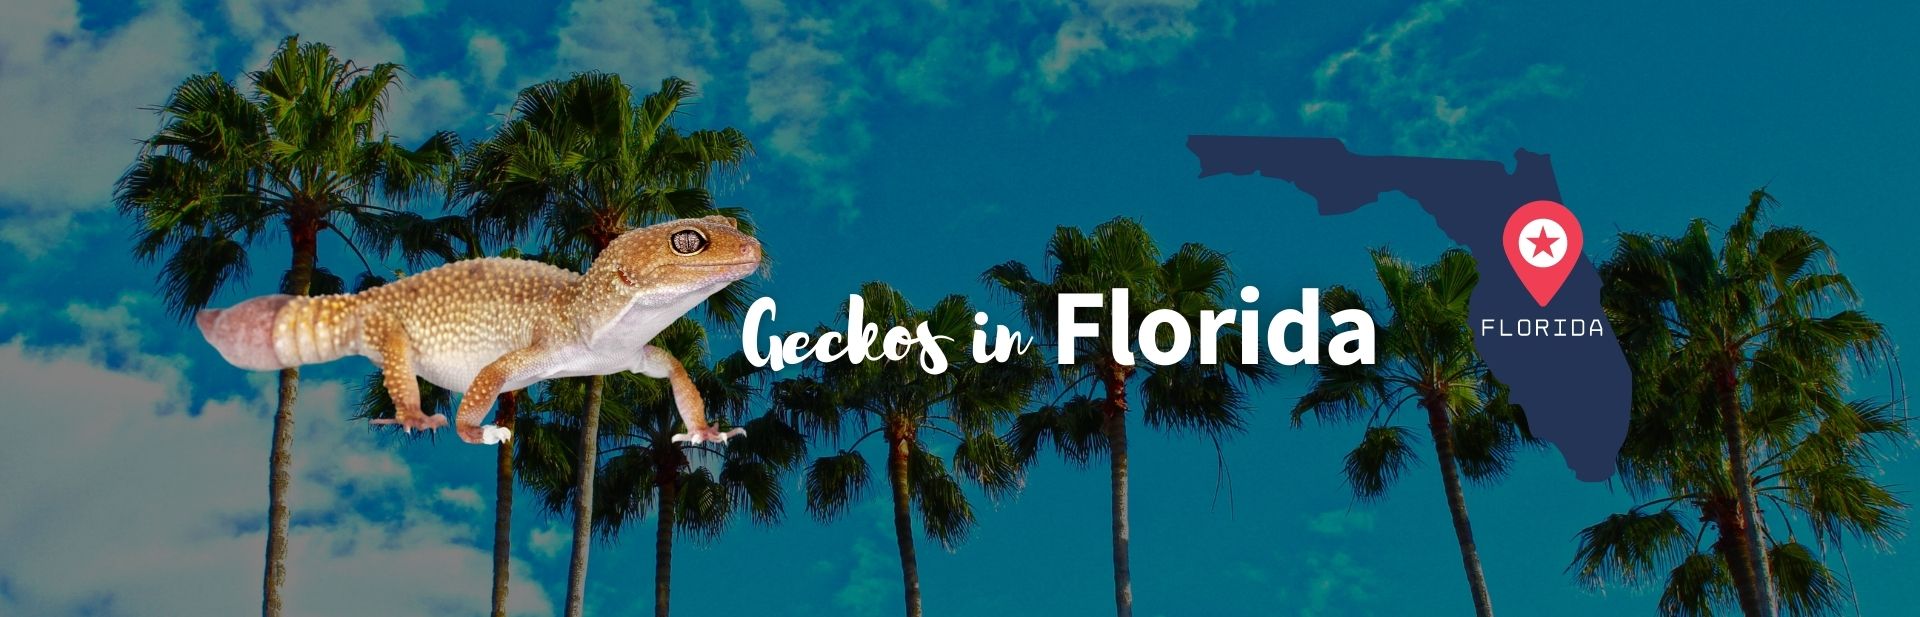 18 Amazing Types of Geckos in Florida: ID Guide and Photos